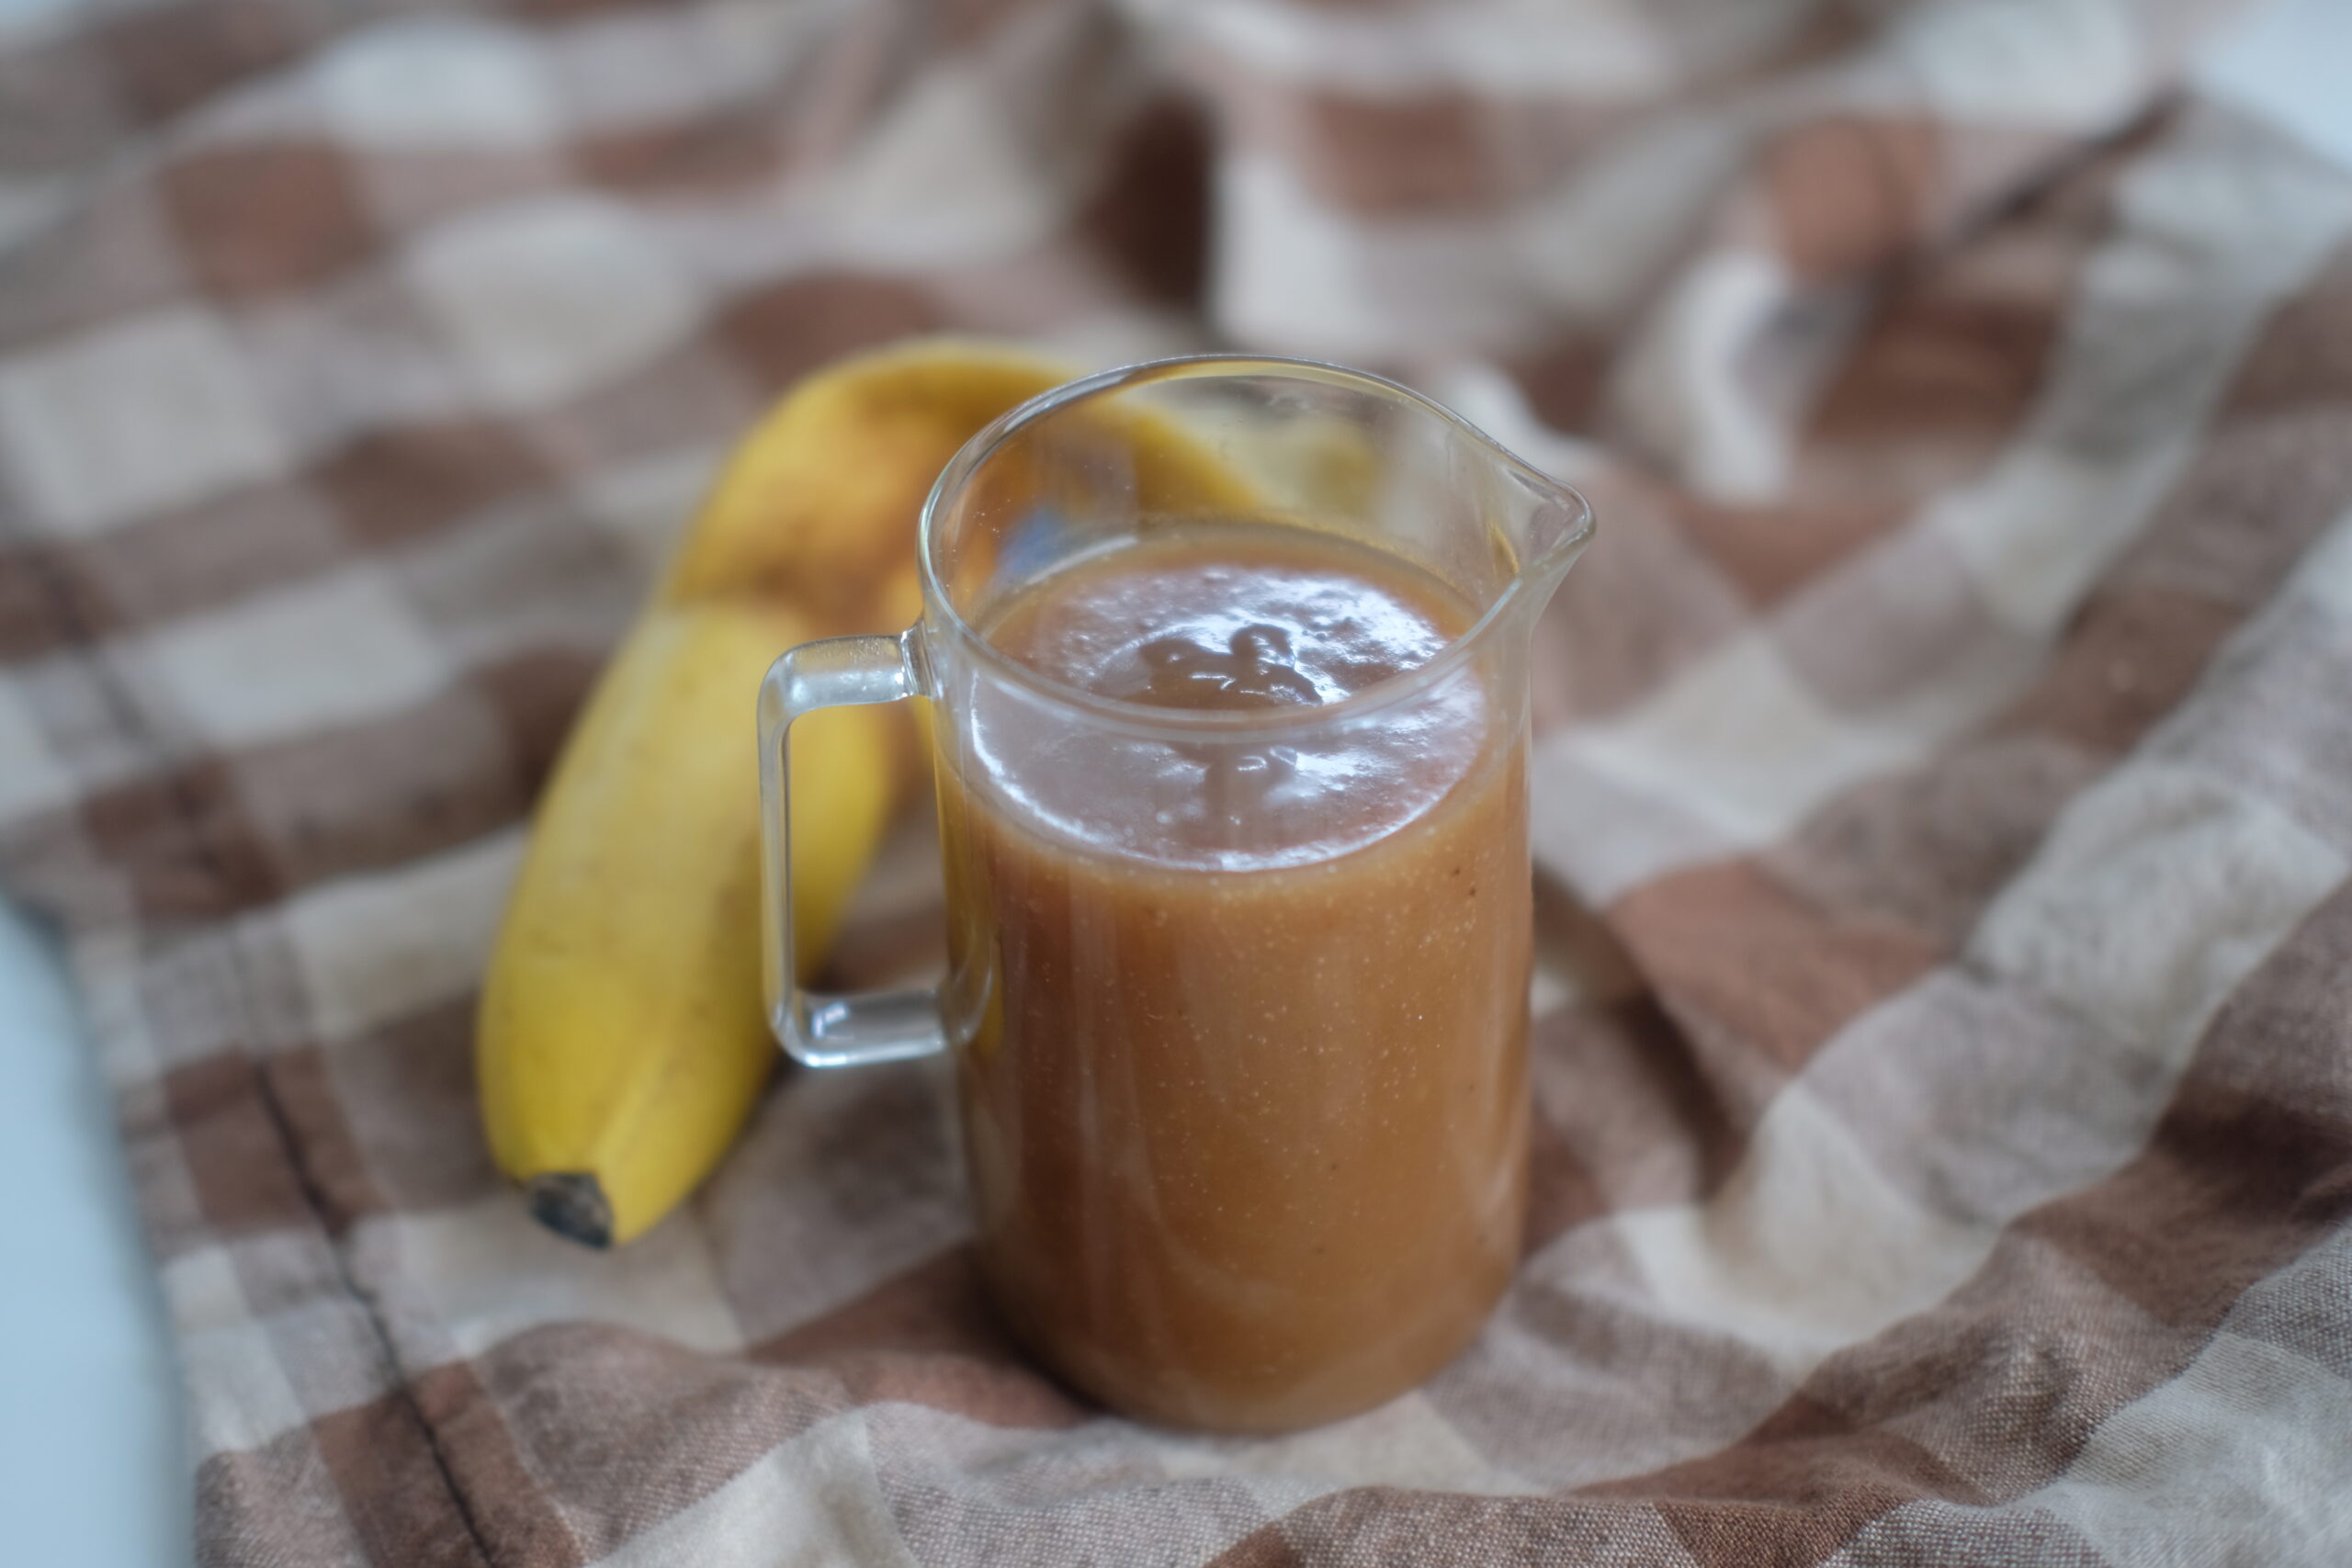 Caramel sauce is a decadent treat, but the addition of bananas to caramel takes this syrup up a few notches.